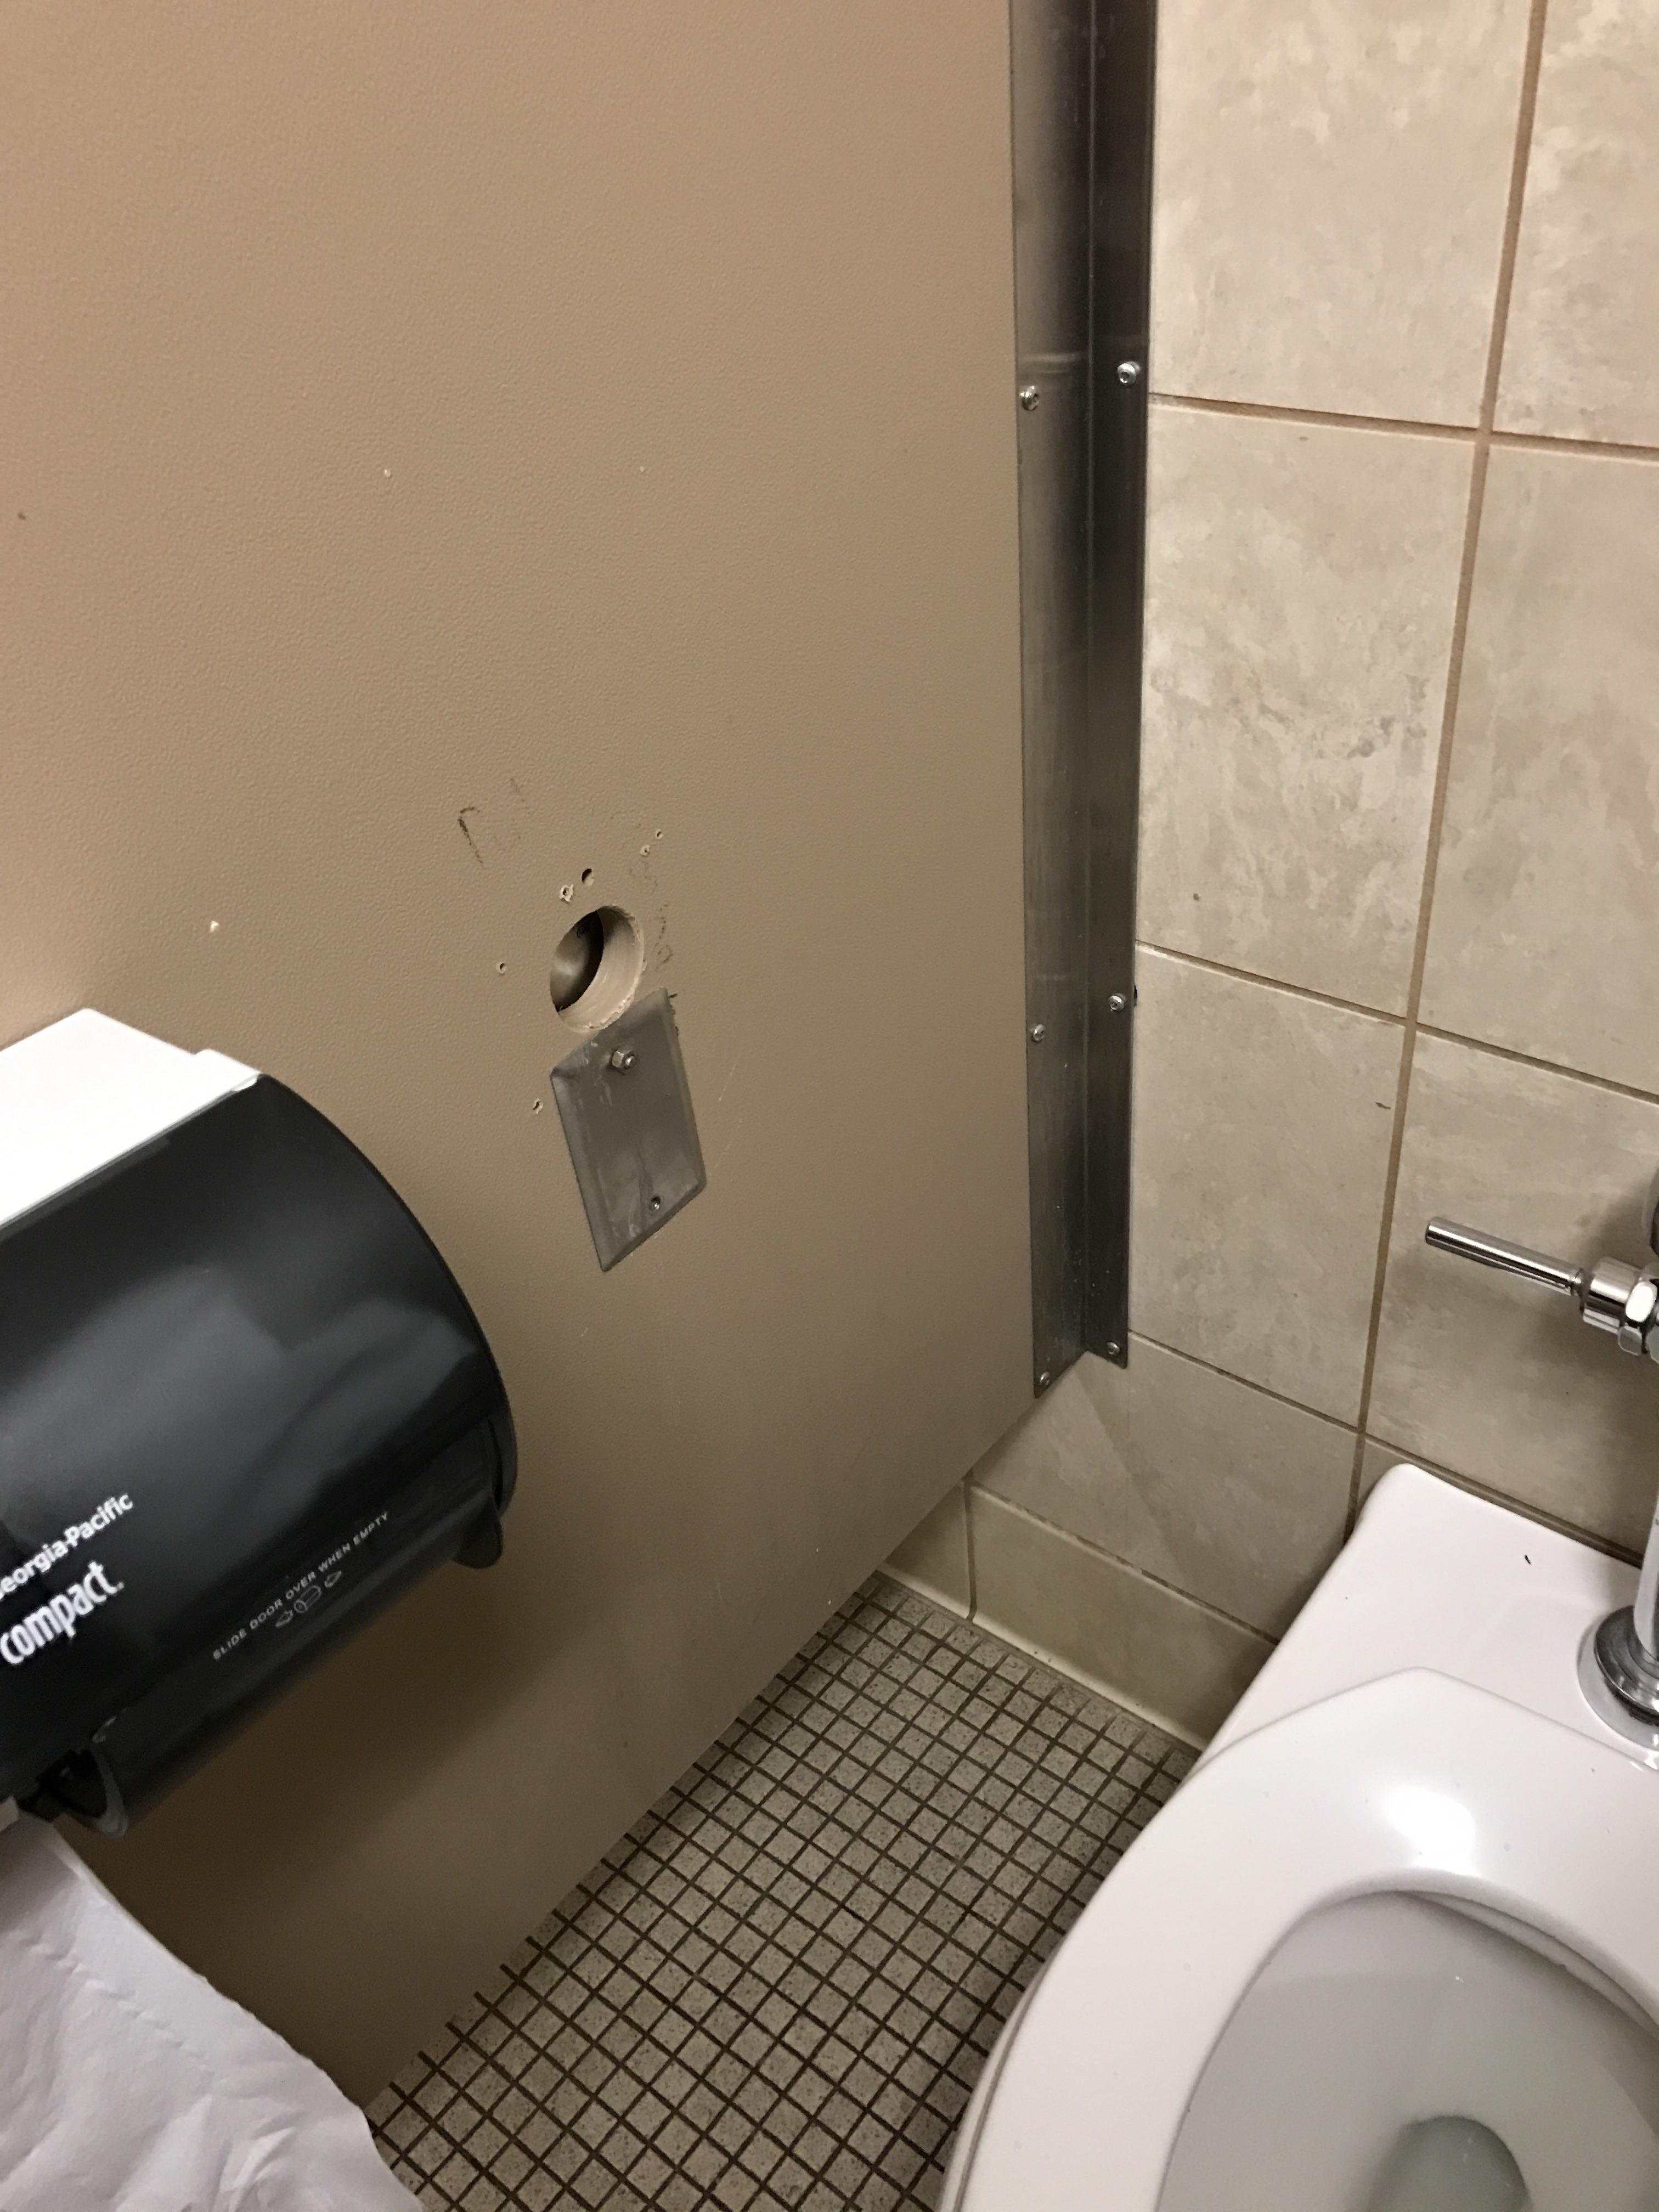 Toilet sex hole in wall